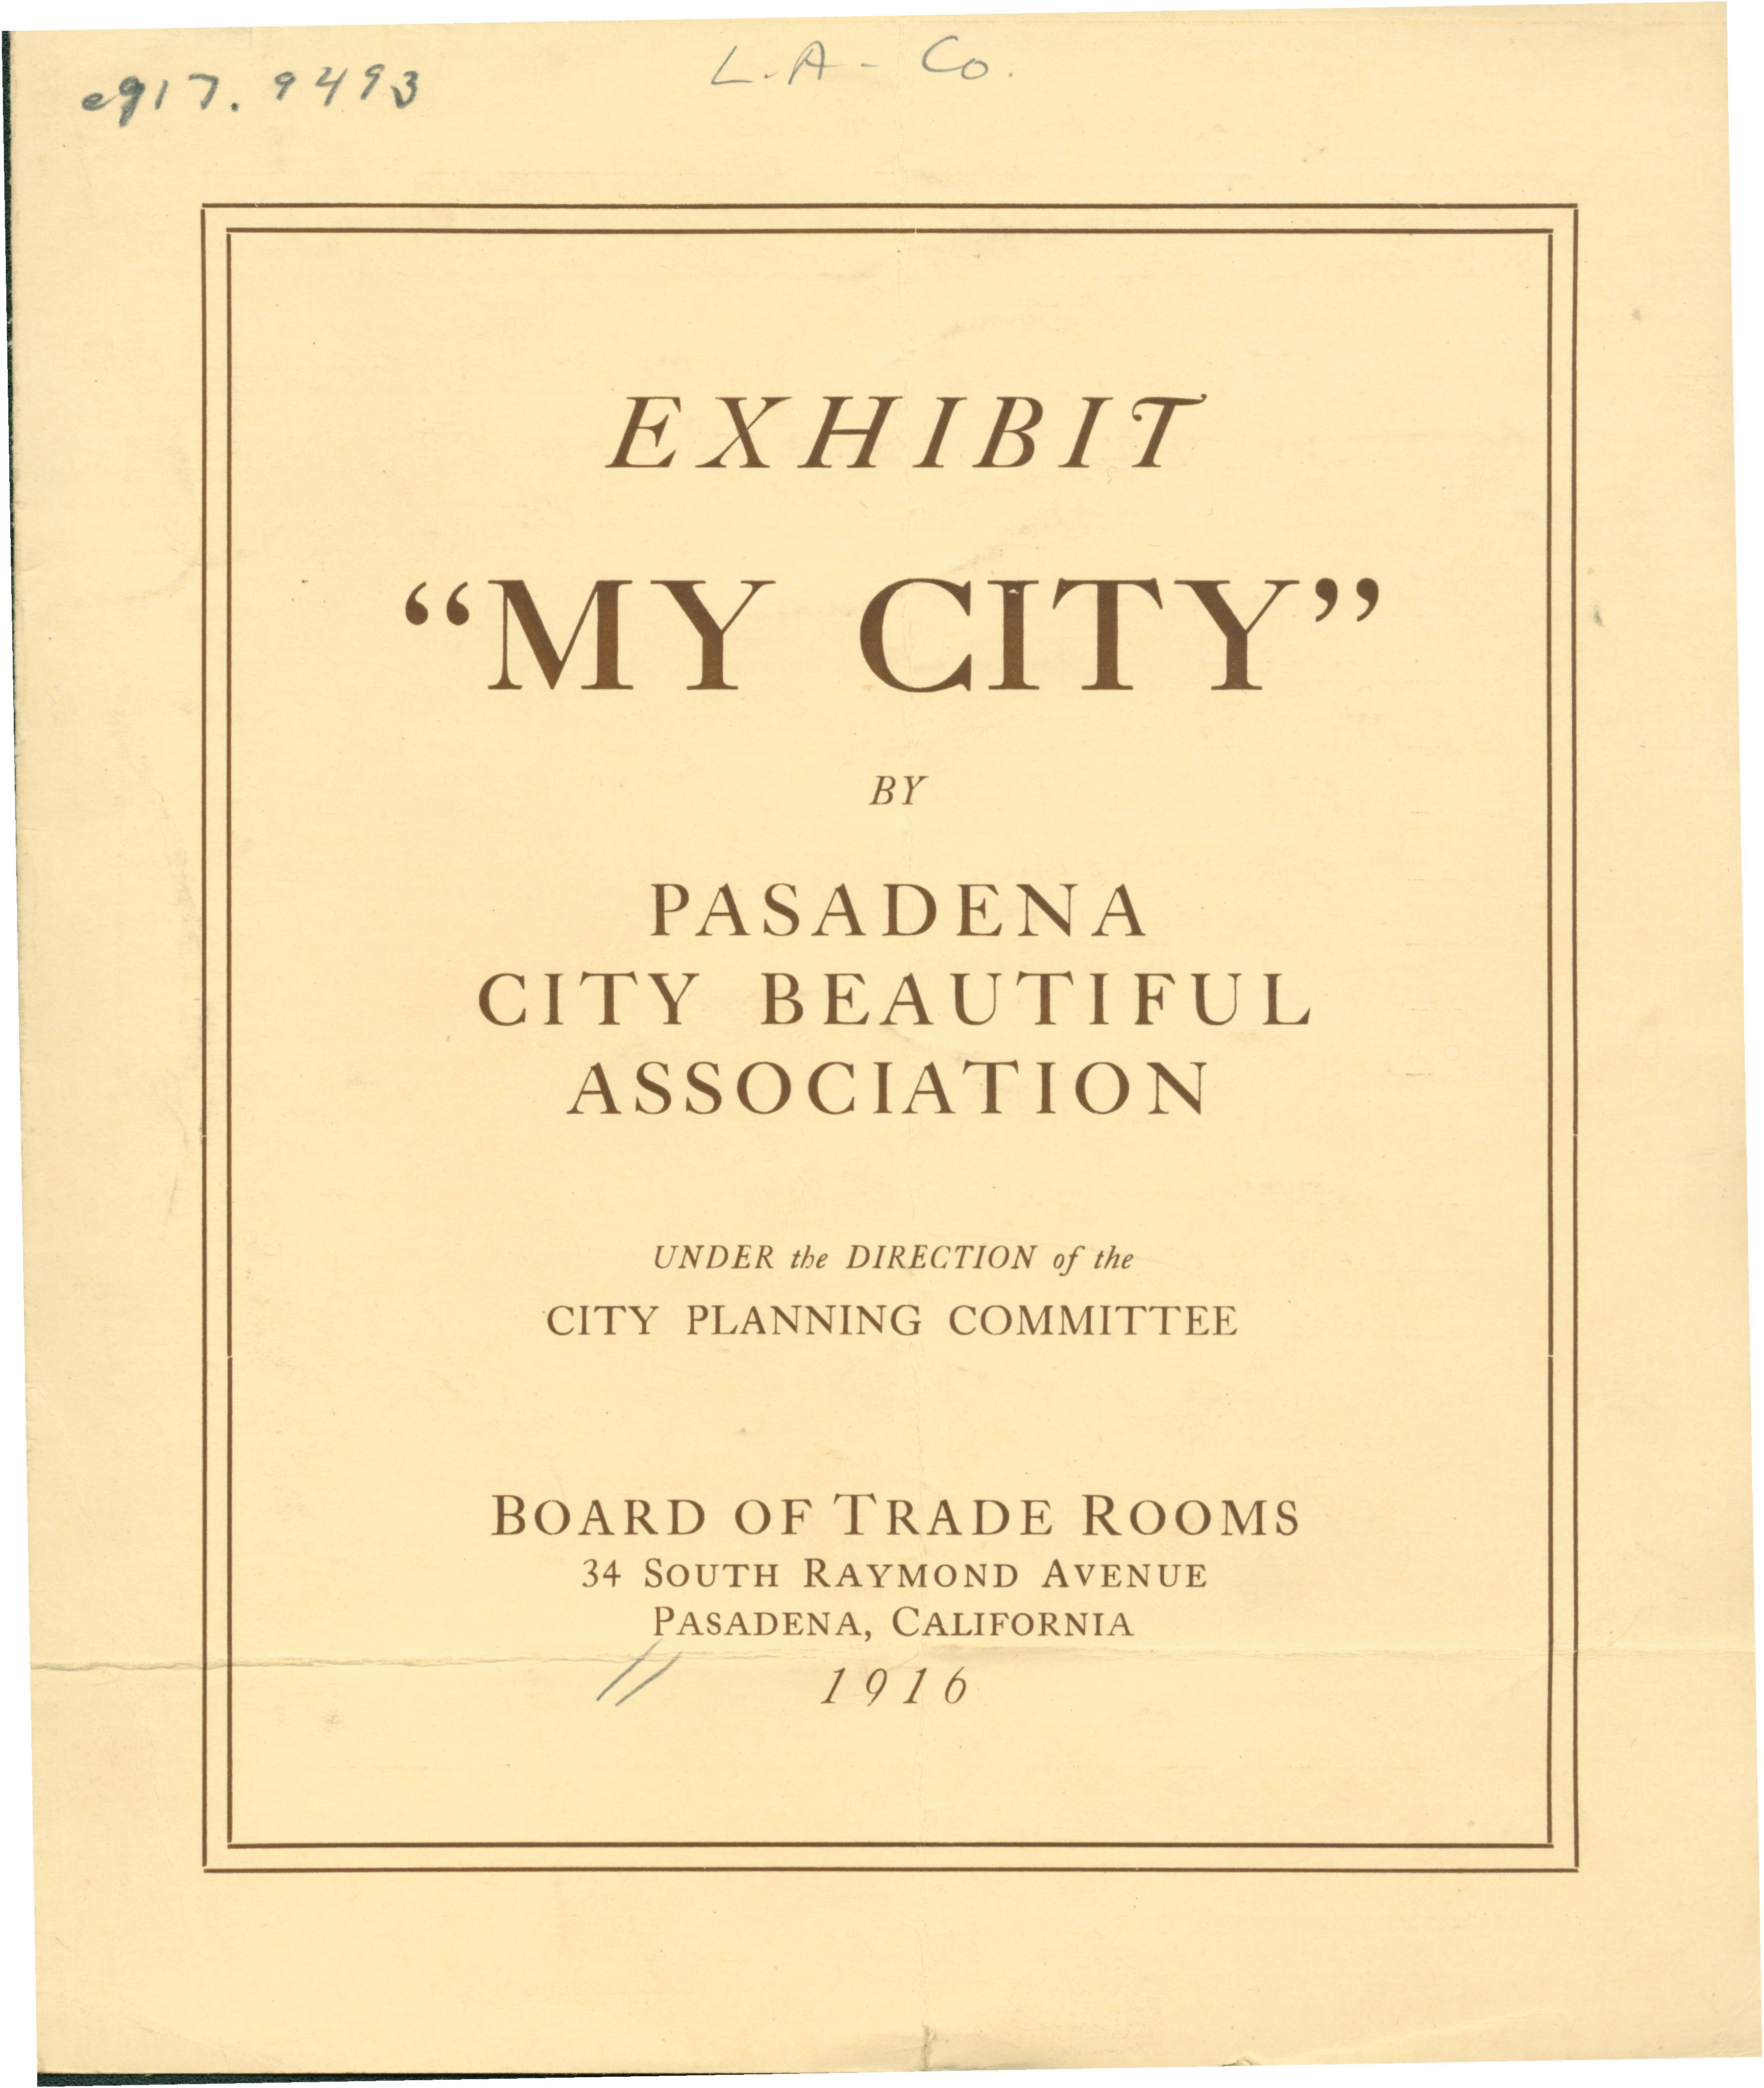 Front cover shows title information